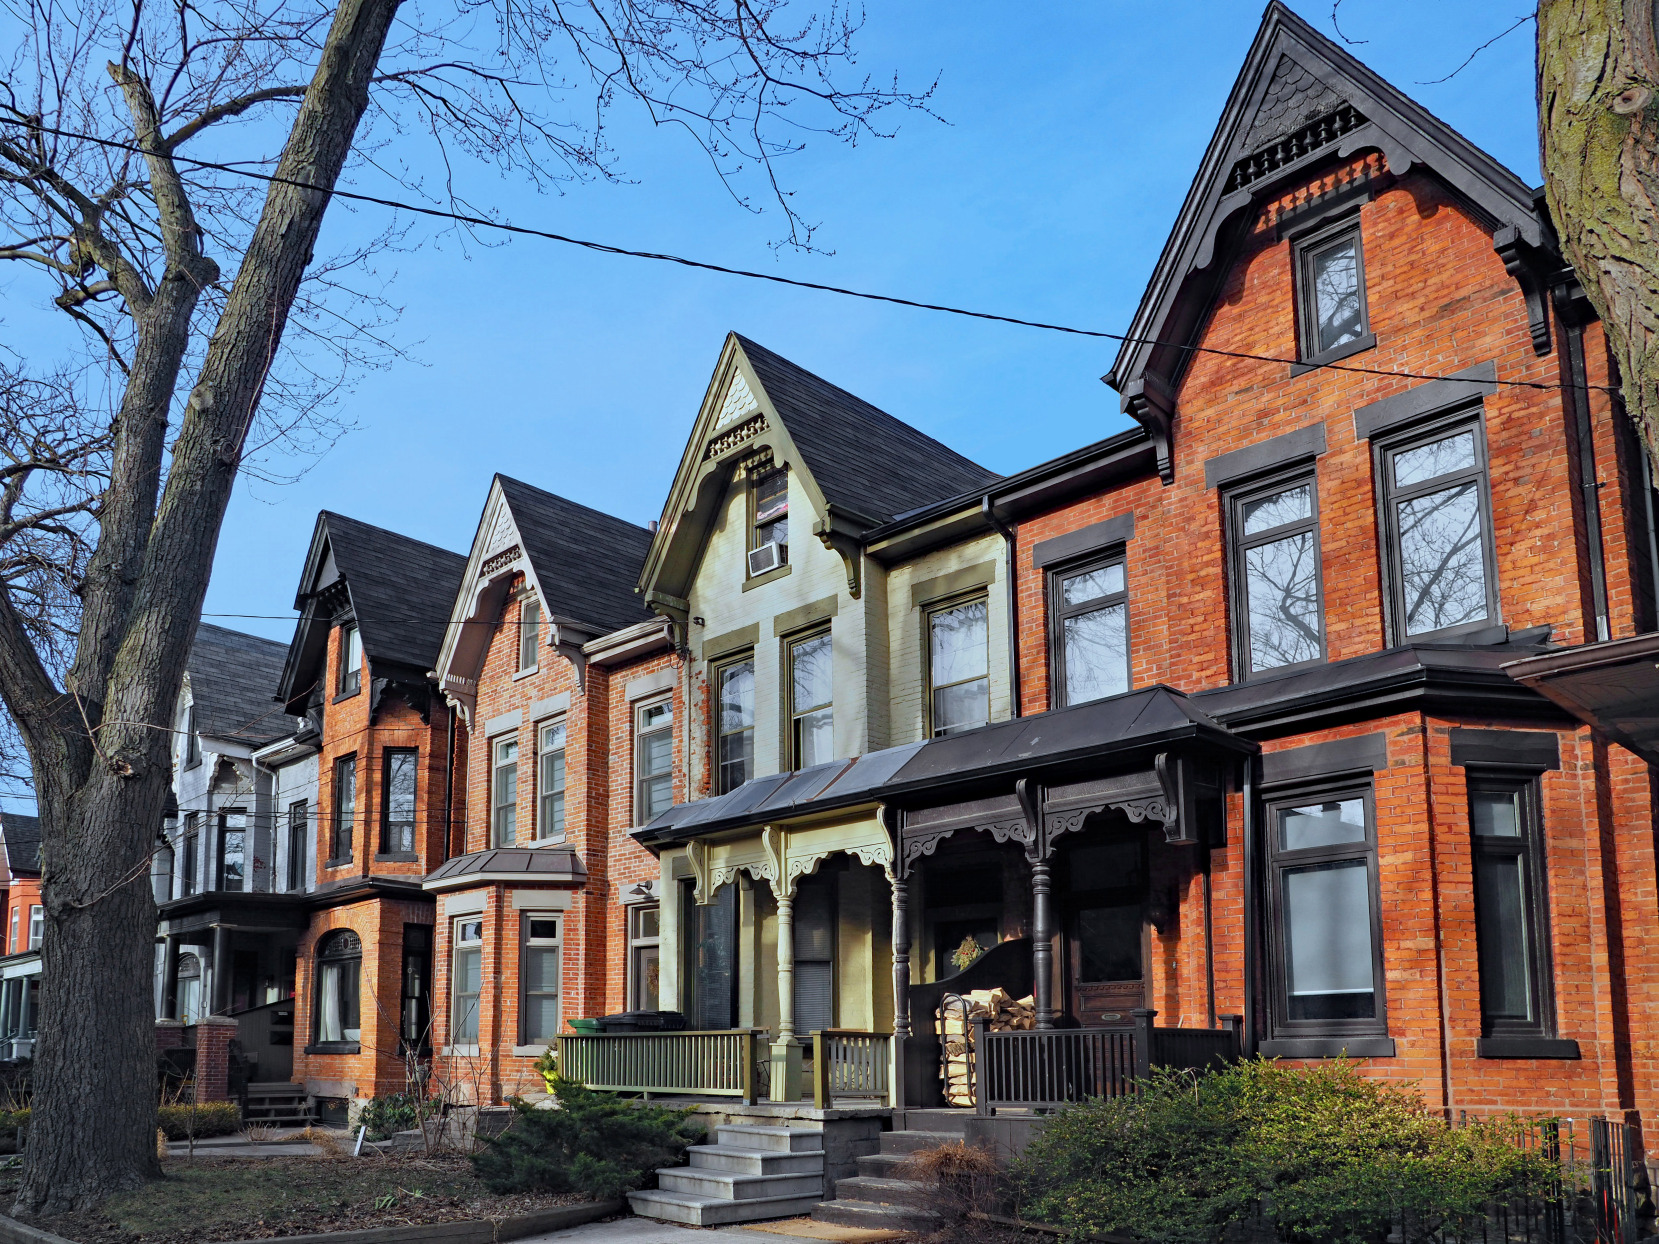 Row of old Victorian brick houses with gables